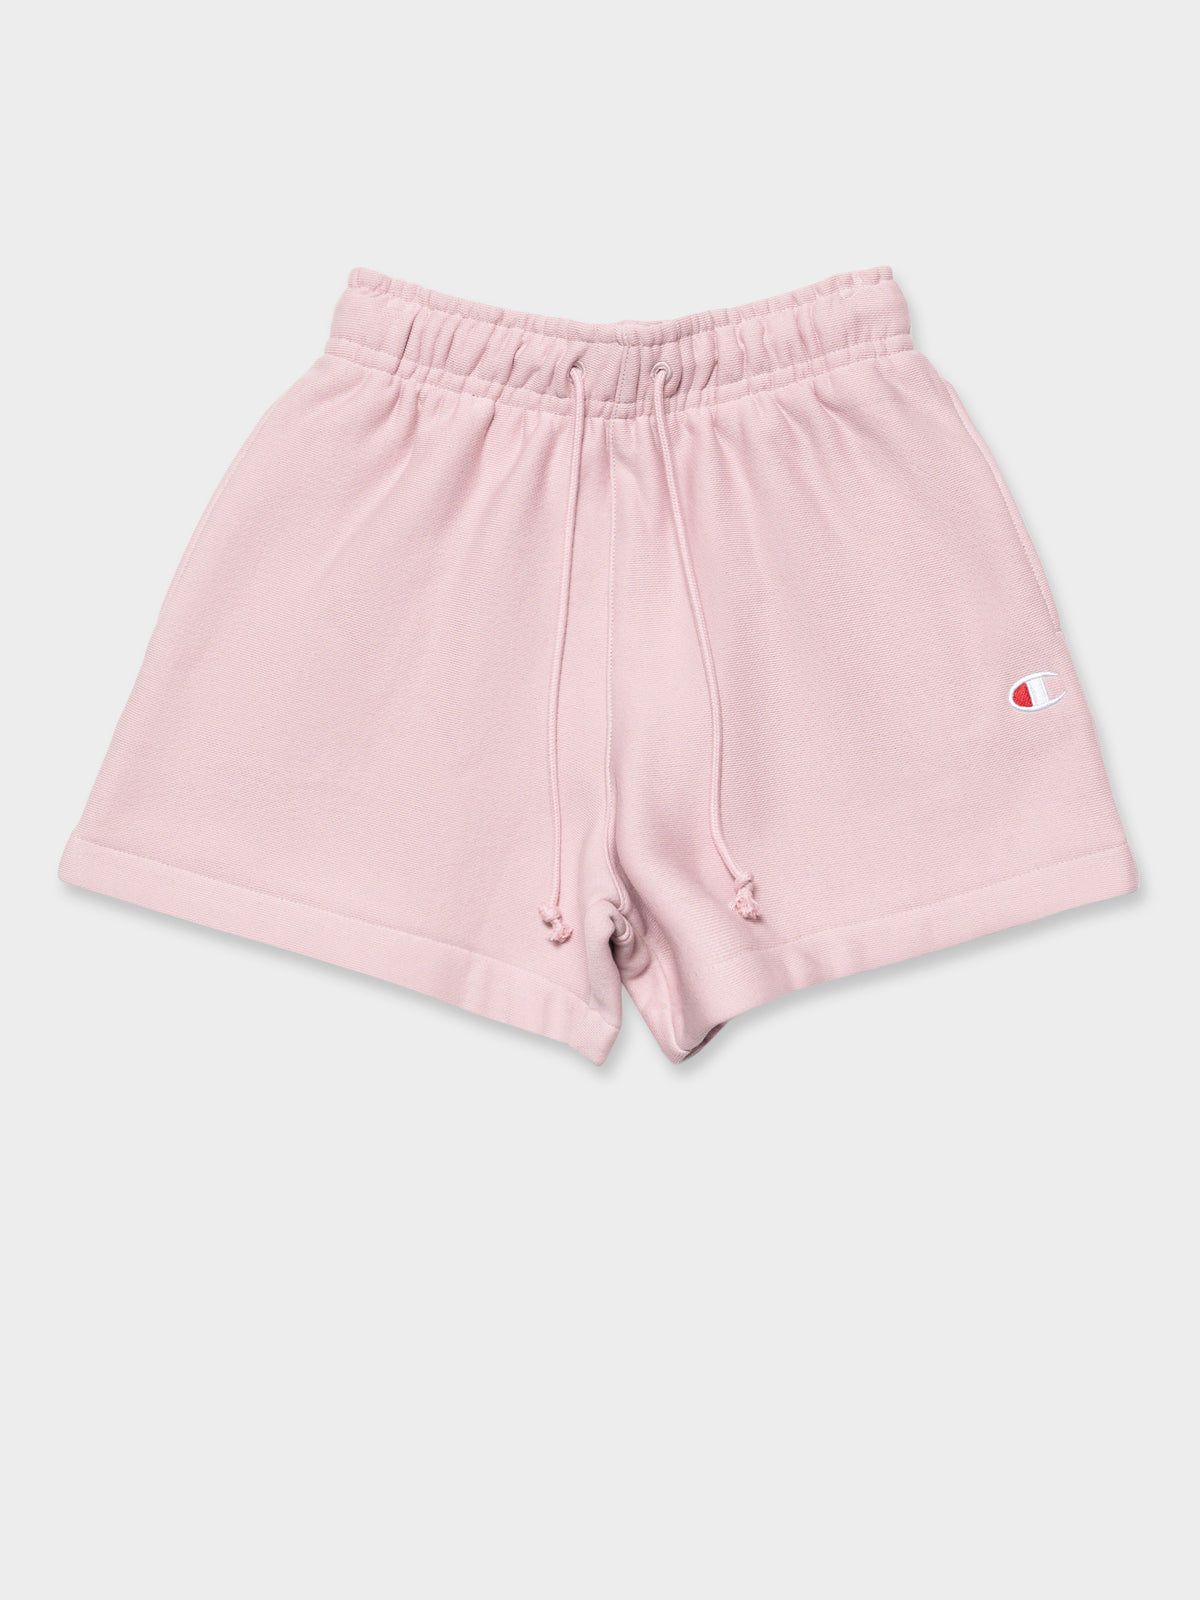 Reverse Weave SML C Relaxed Shorts in Hush Pink